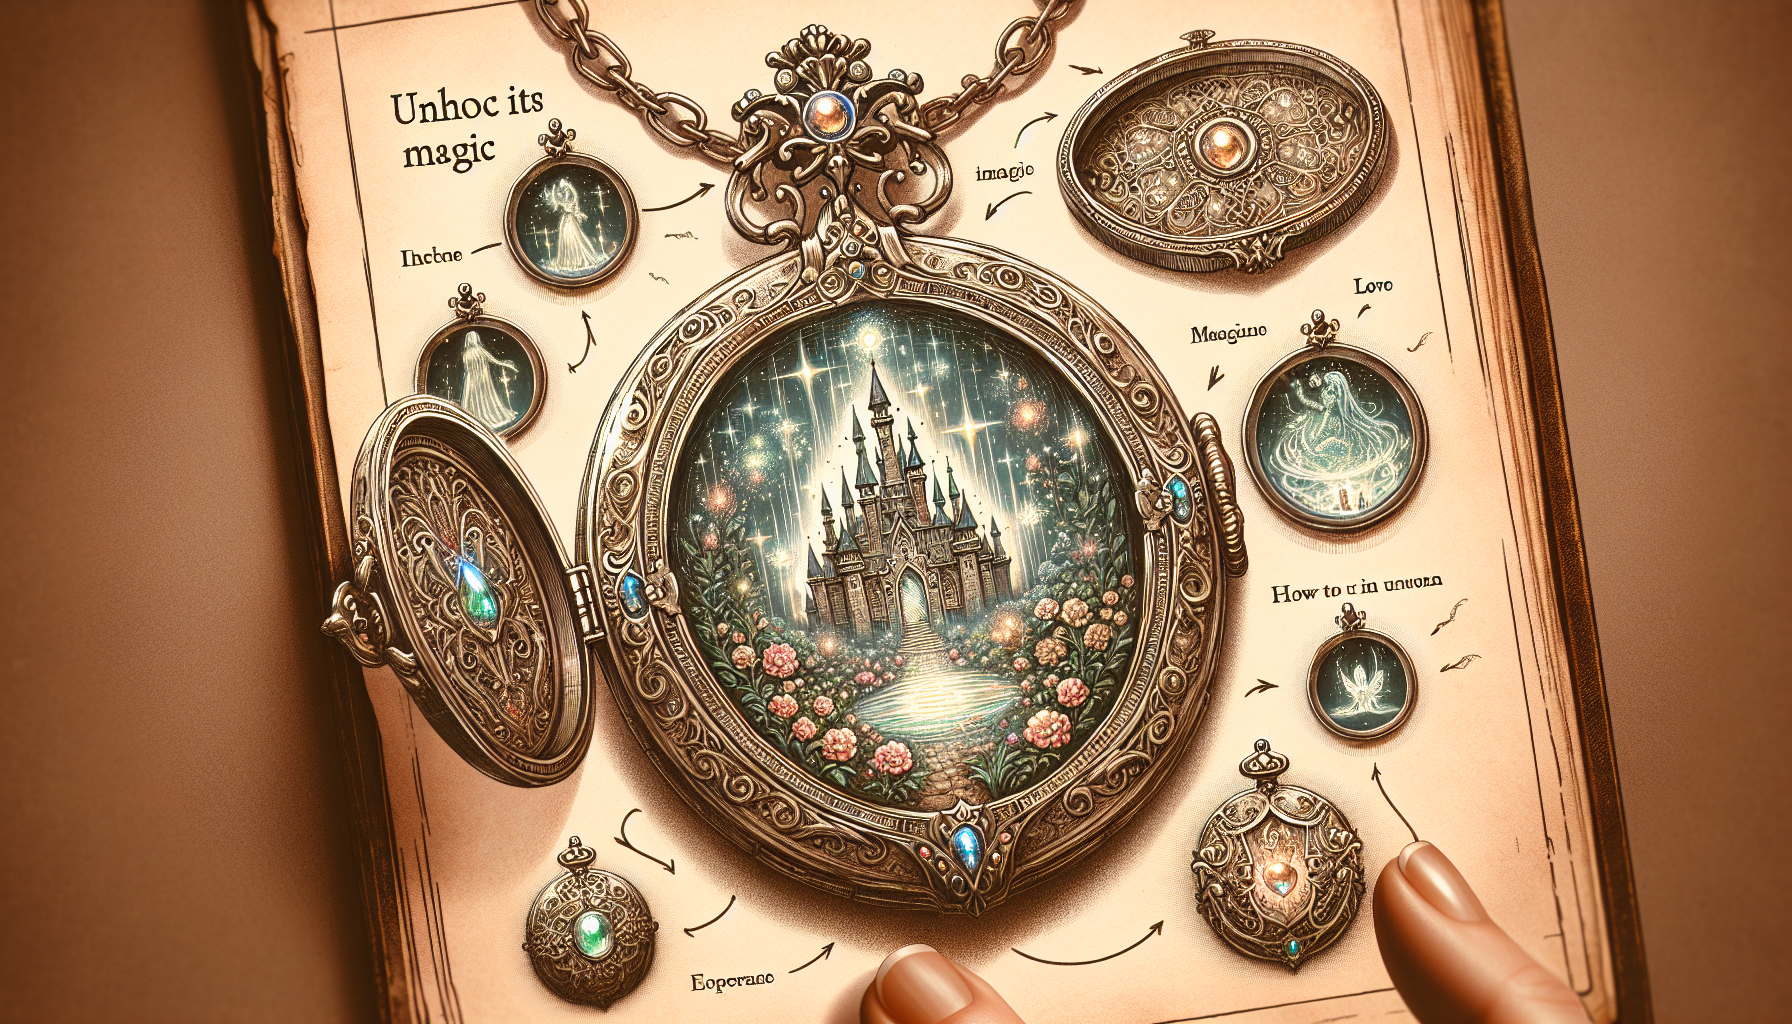 Imagine a stunning visual guide detailing a magical locket necklace. It is an ornate, antique piece with a sophisticated design, encrusted with sparkling gems, probably seen in an old fairy tale. The 